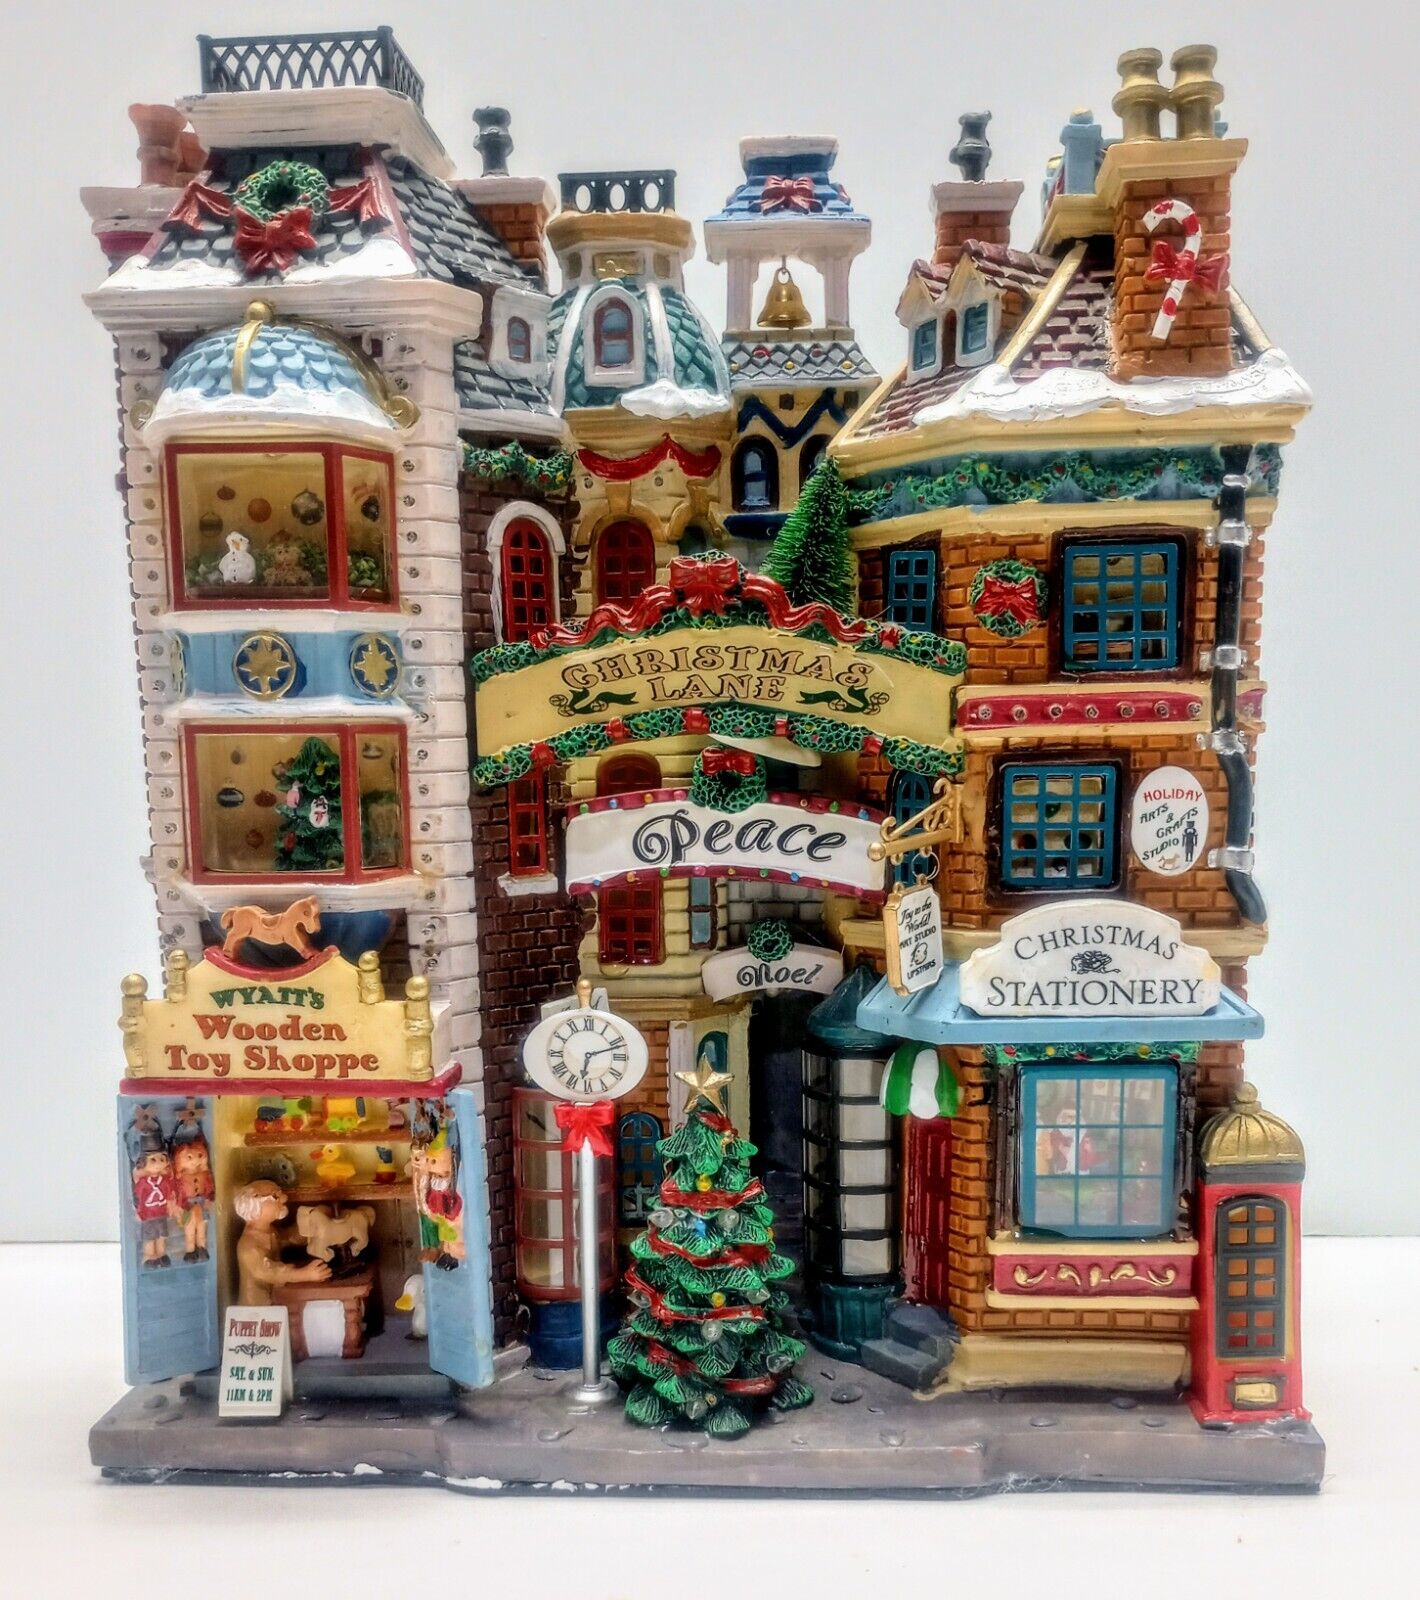 Lemax Christmas Lane Essex Street Facade Lighted Village Toy Store Magical 05104